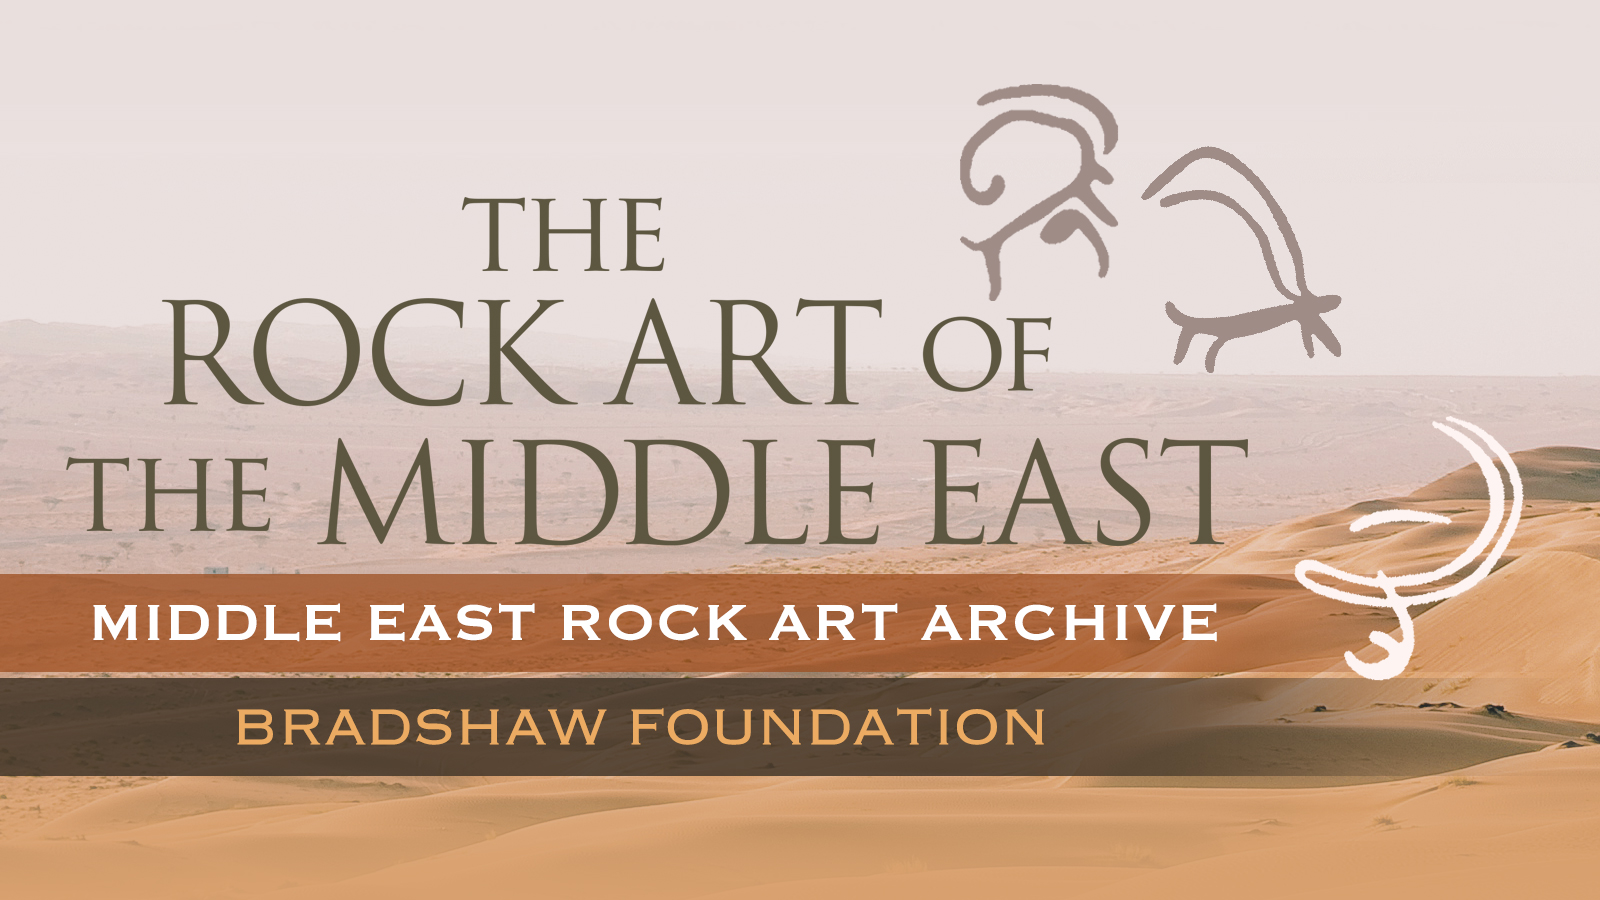 The Middle East Rock Art Archive Bradshaw Foundation